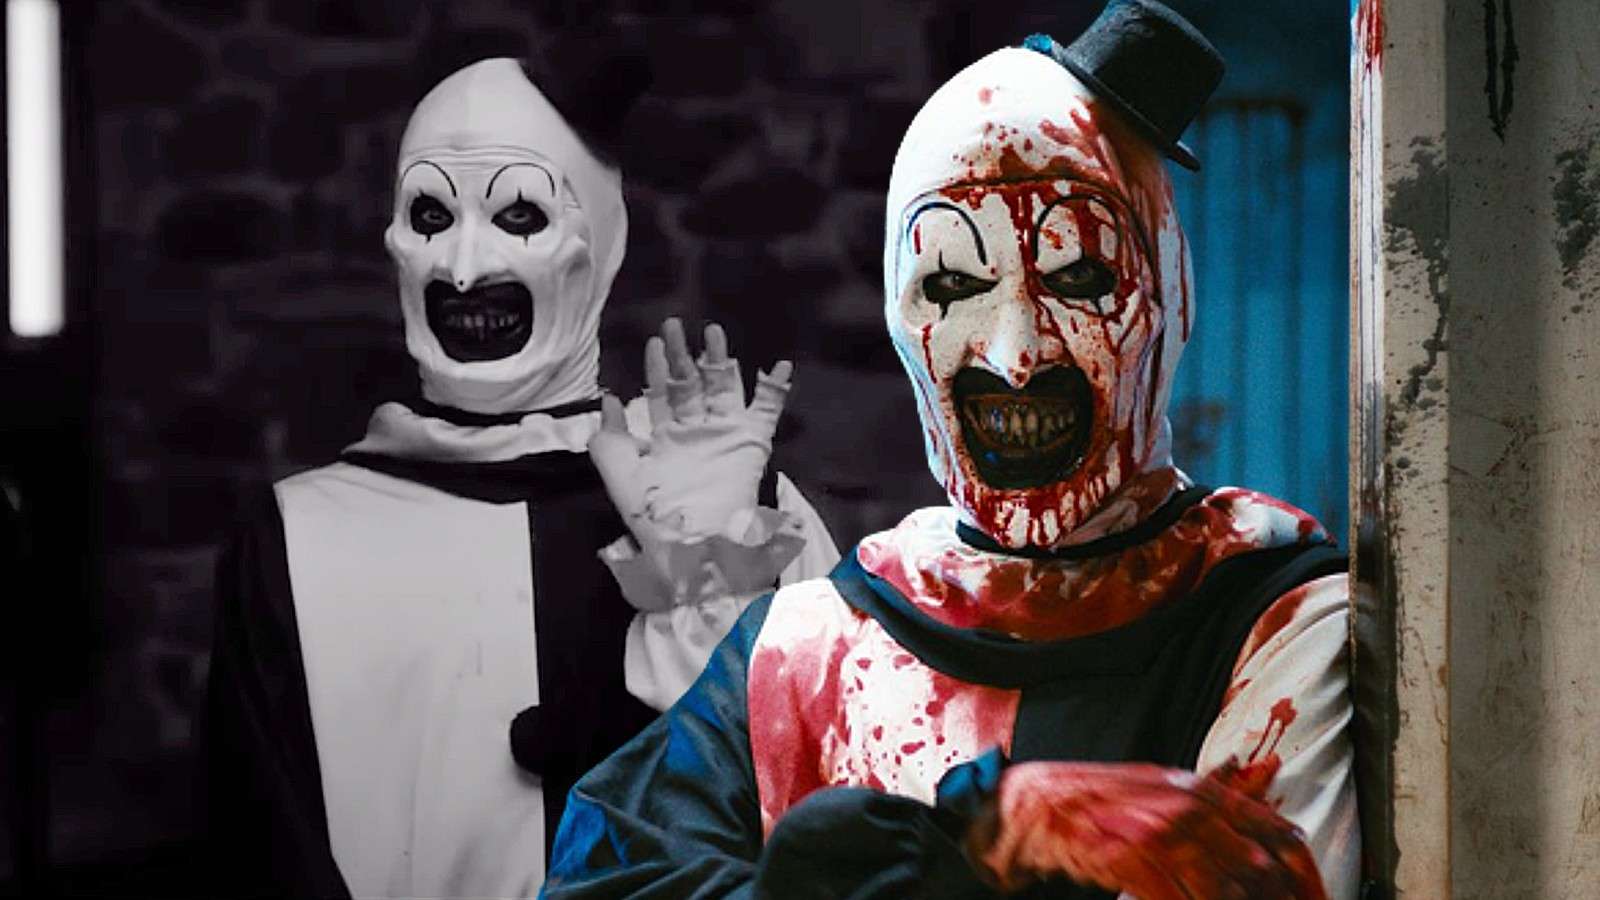 Art the Clown in Bupkis and Terrifier 2